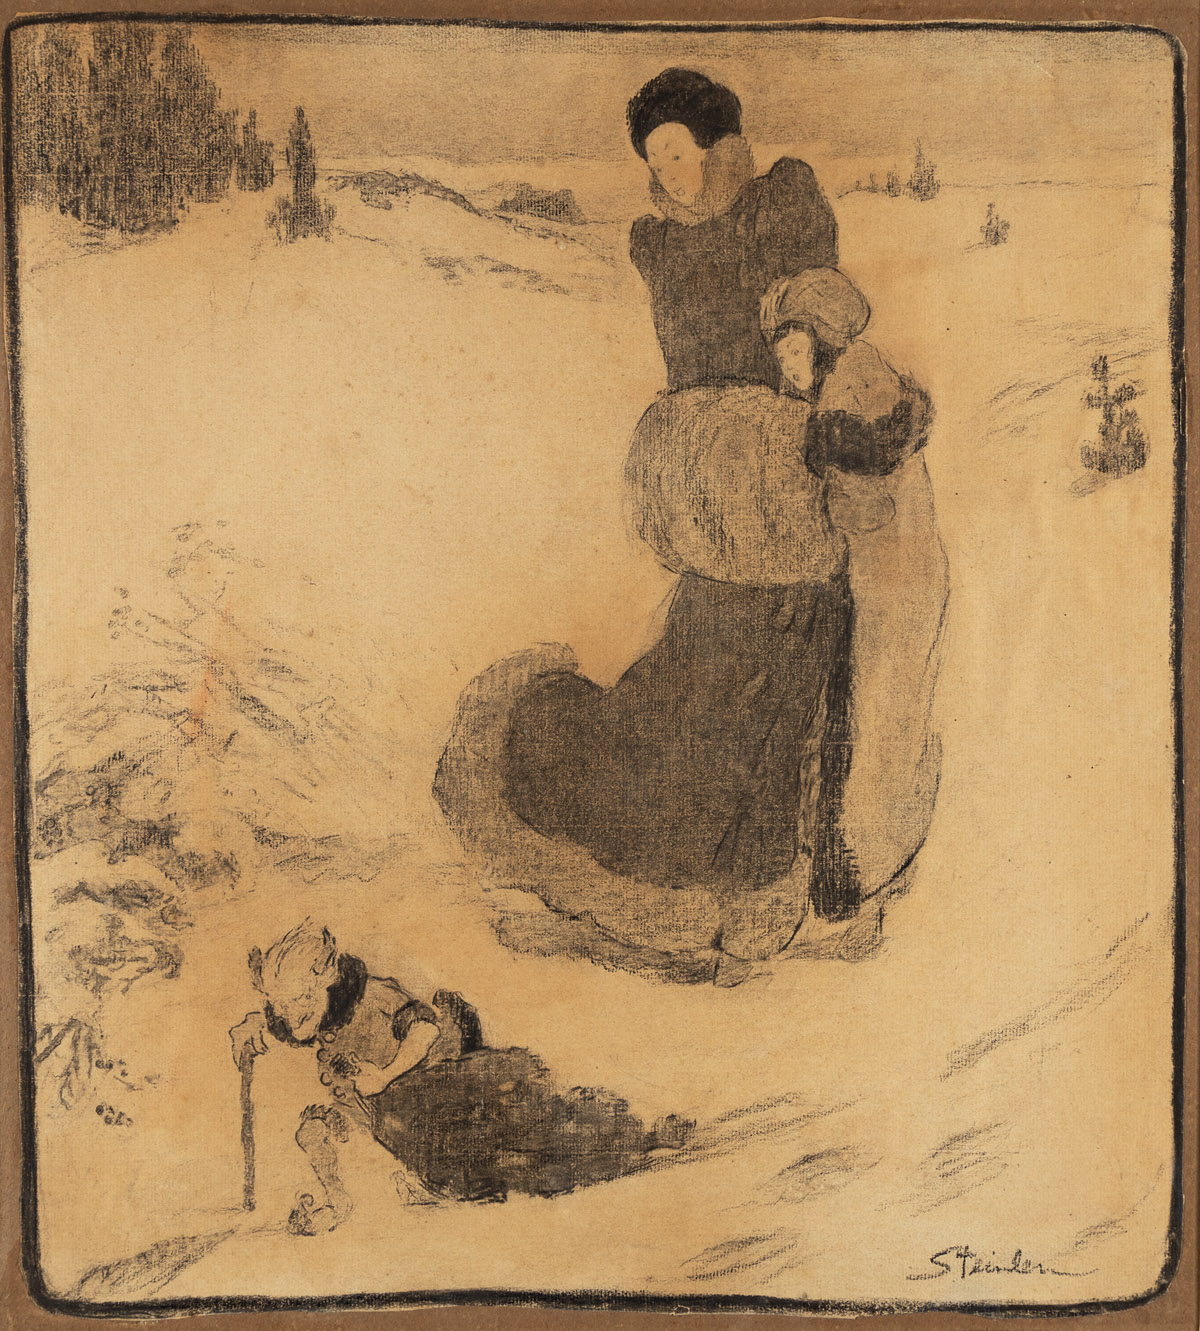 THÉOPHILE-ALEXANDRE STEINLEN (1859-1923) Startled by a Troll in a Snow-Covered Field.